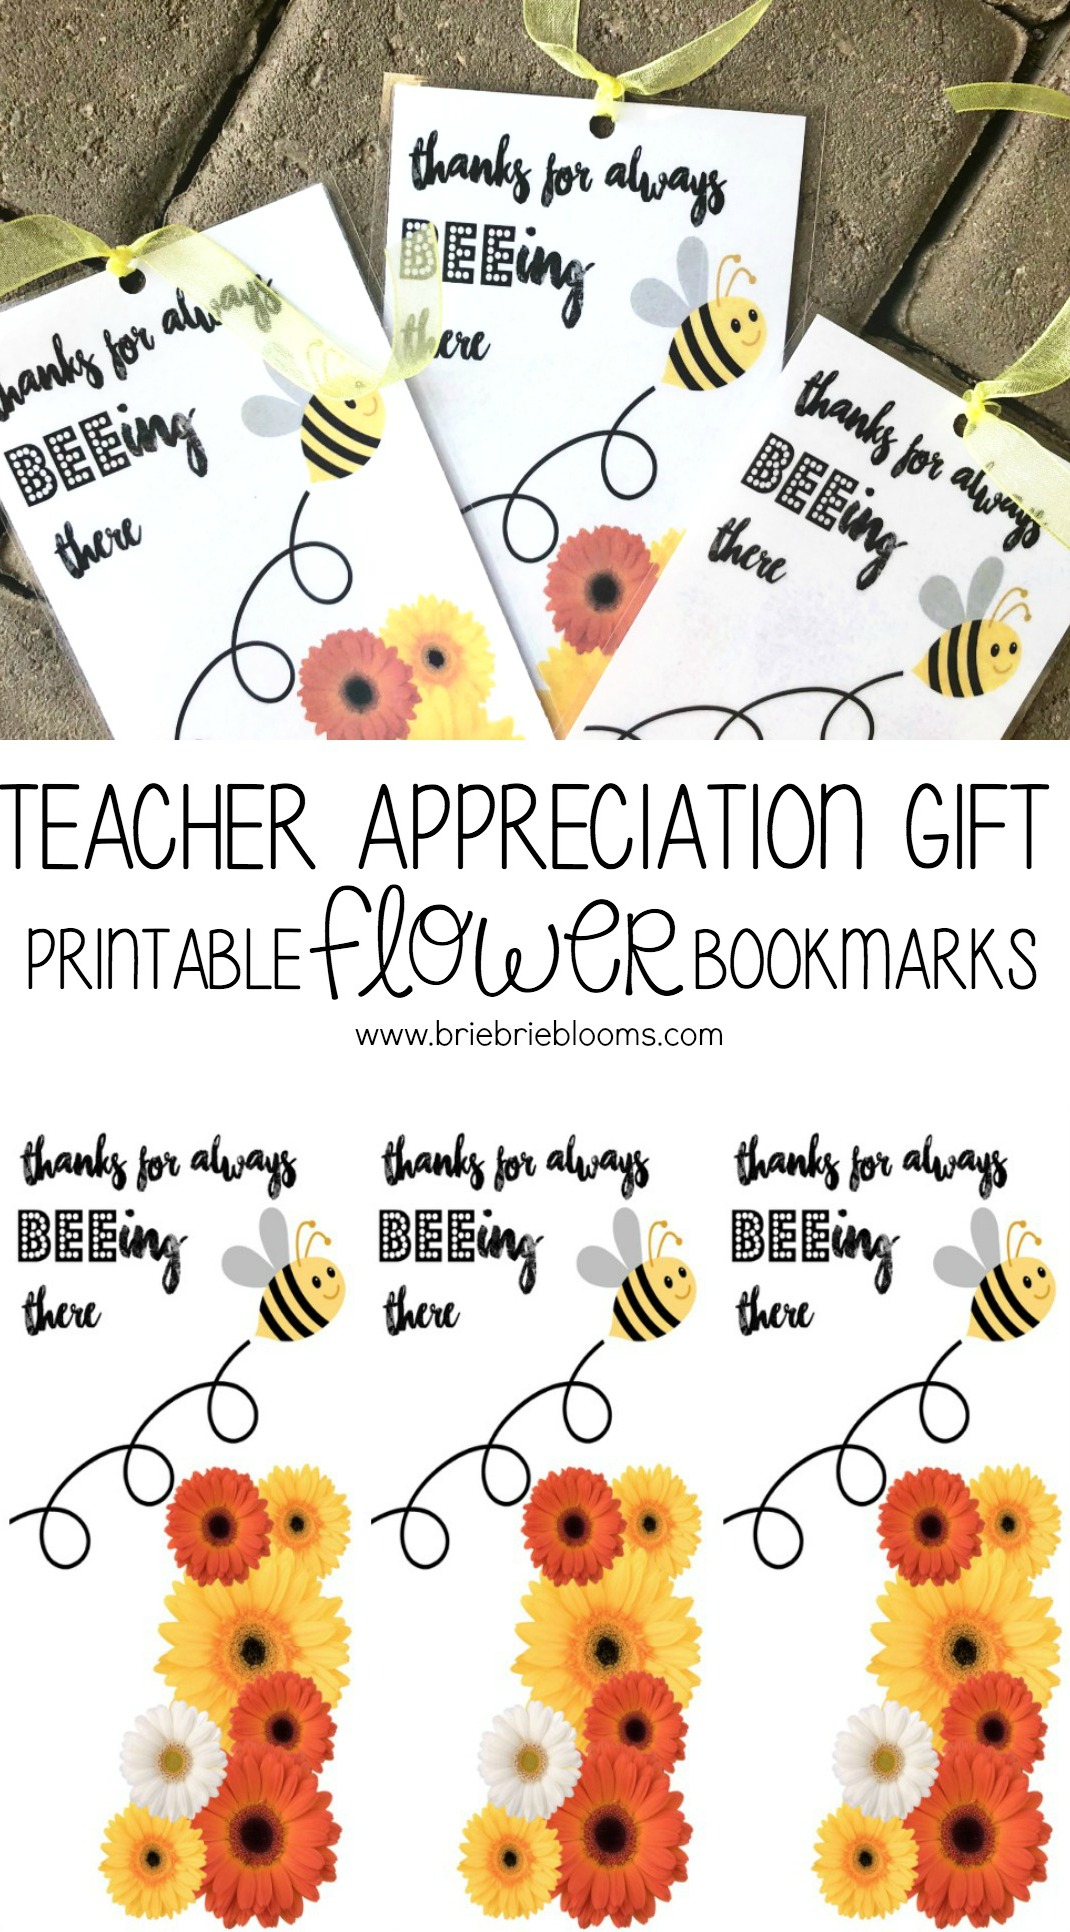 Have fun with a "flower" teacher appreciation week theme day and gift your child's teacher these easy printable flower bookmarks.